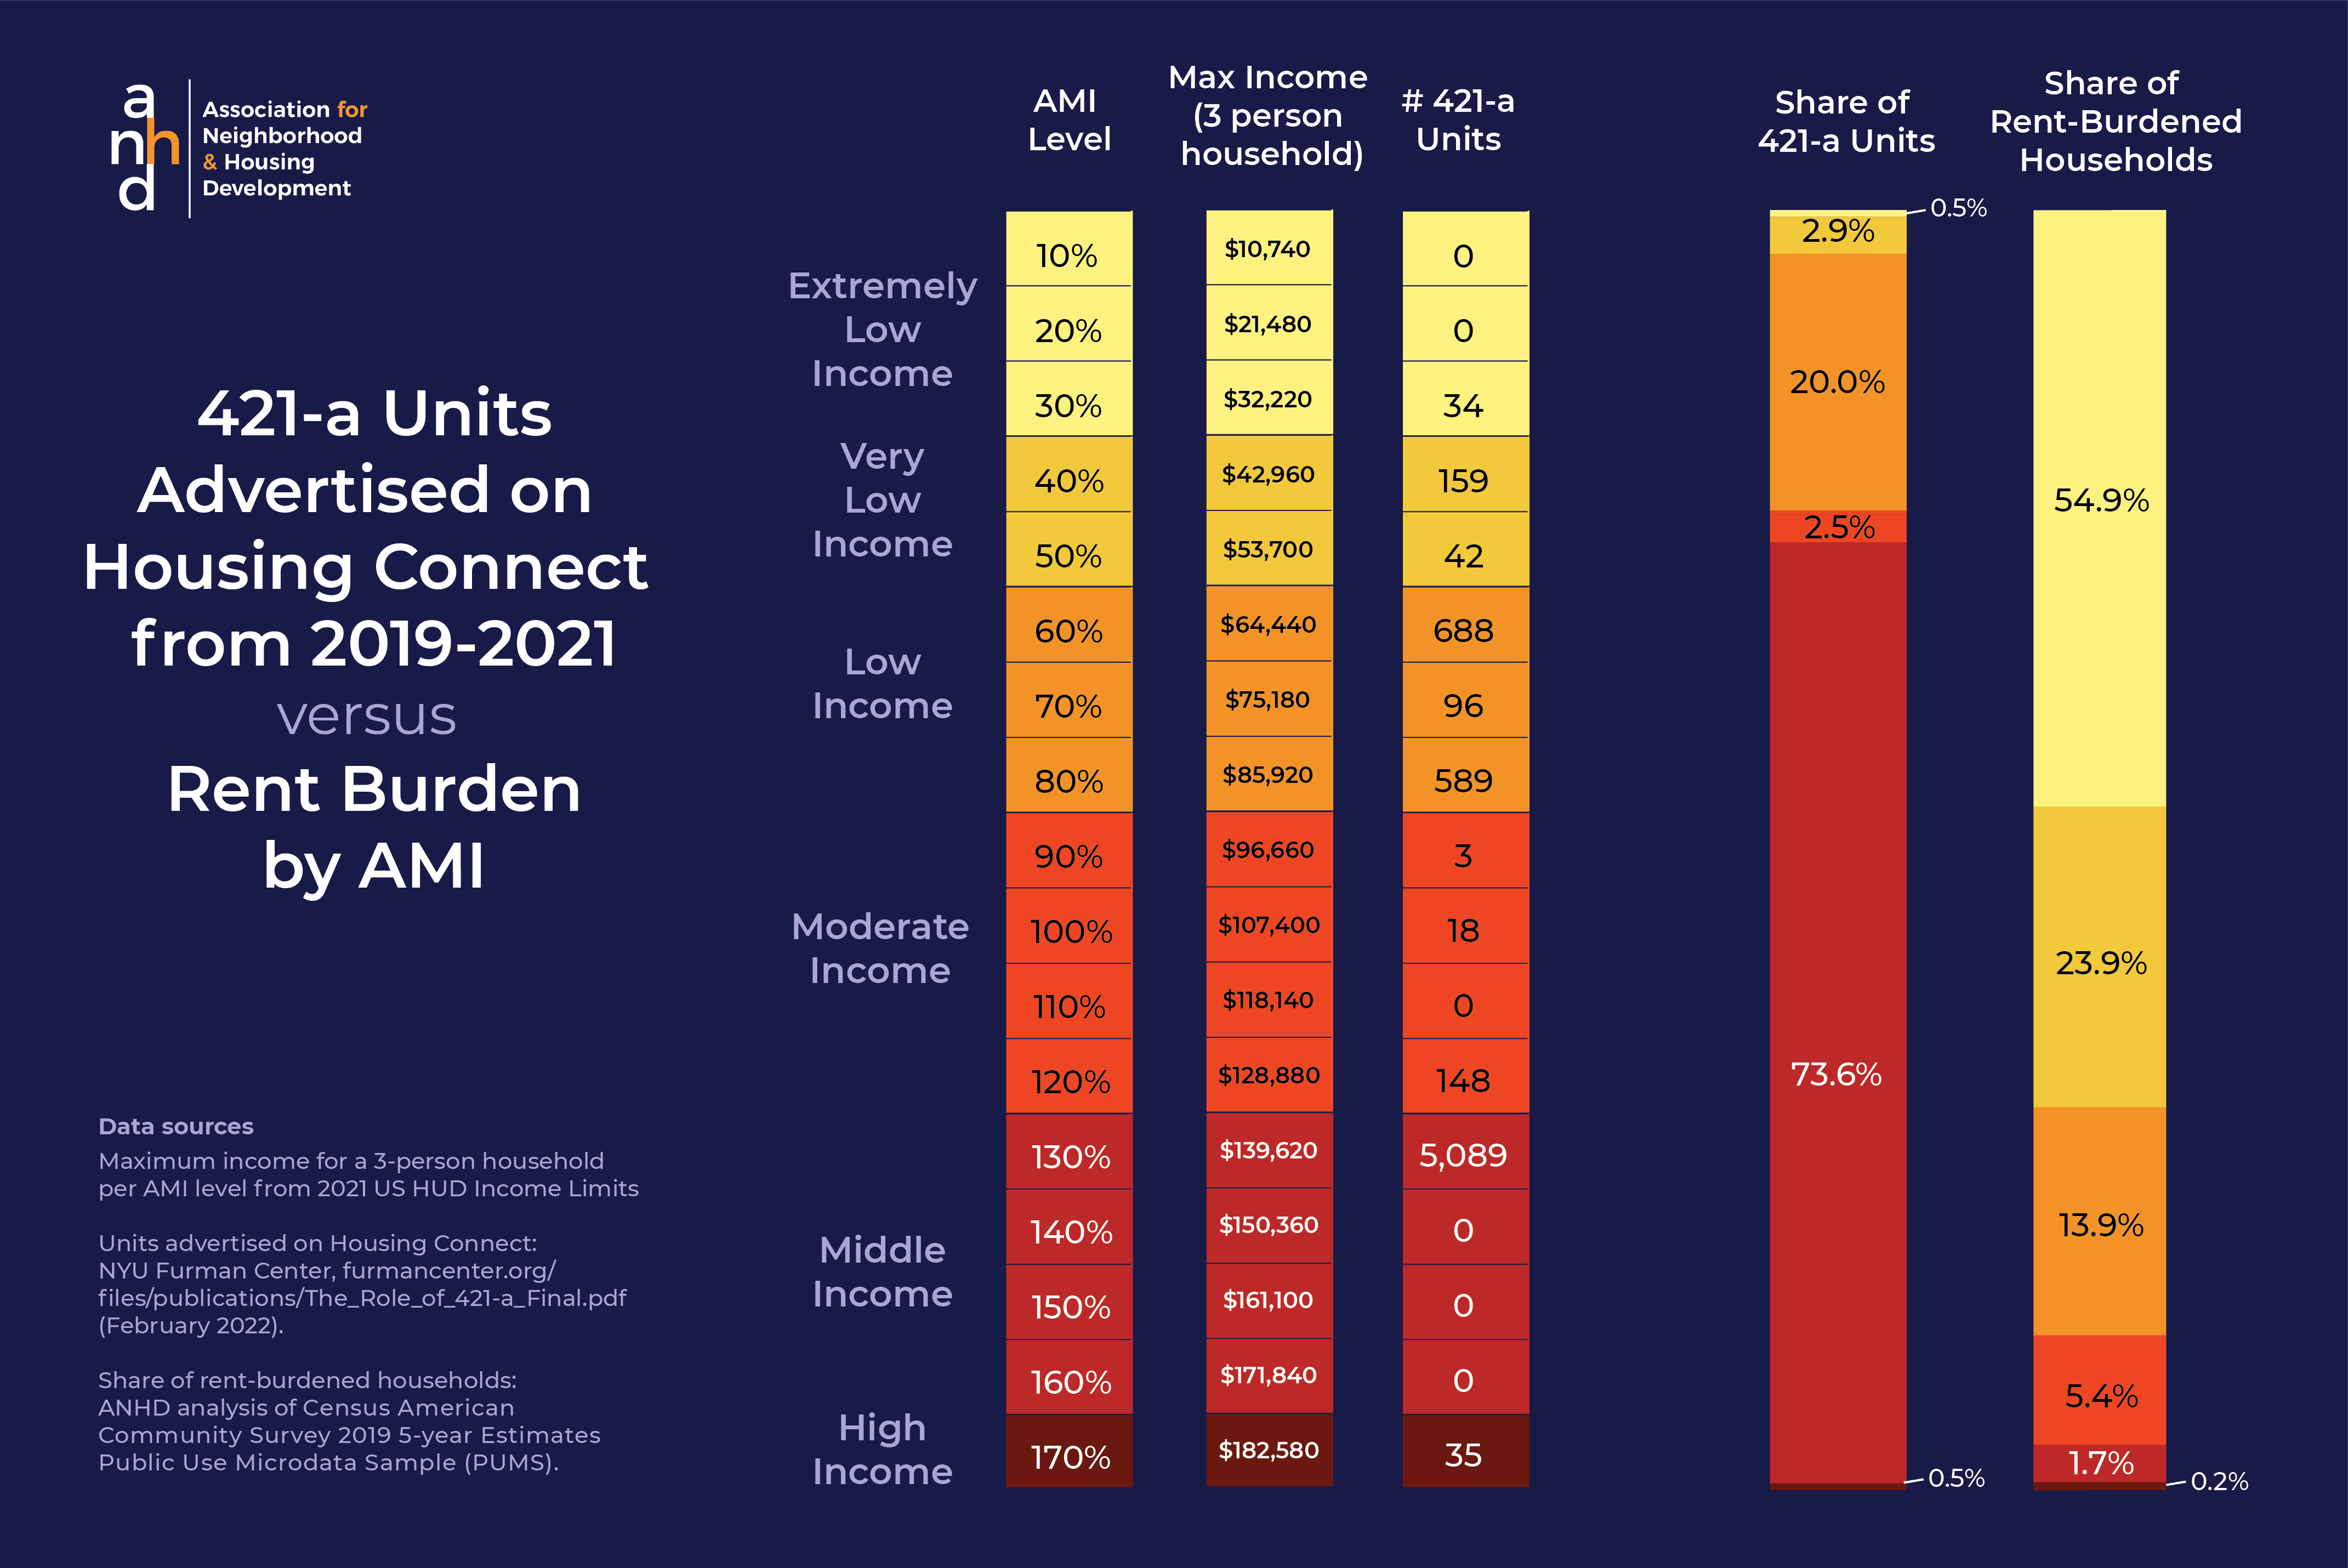 421-a Units Advertised on Housing Connect from 2019-2021 versus Rent Burden by AMI